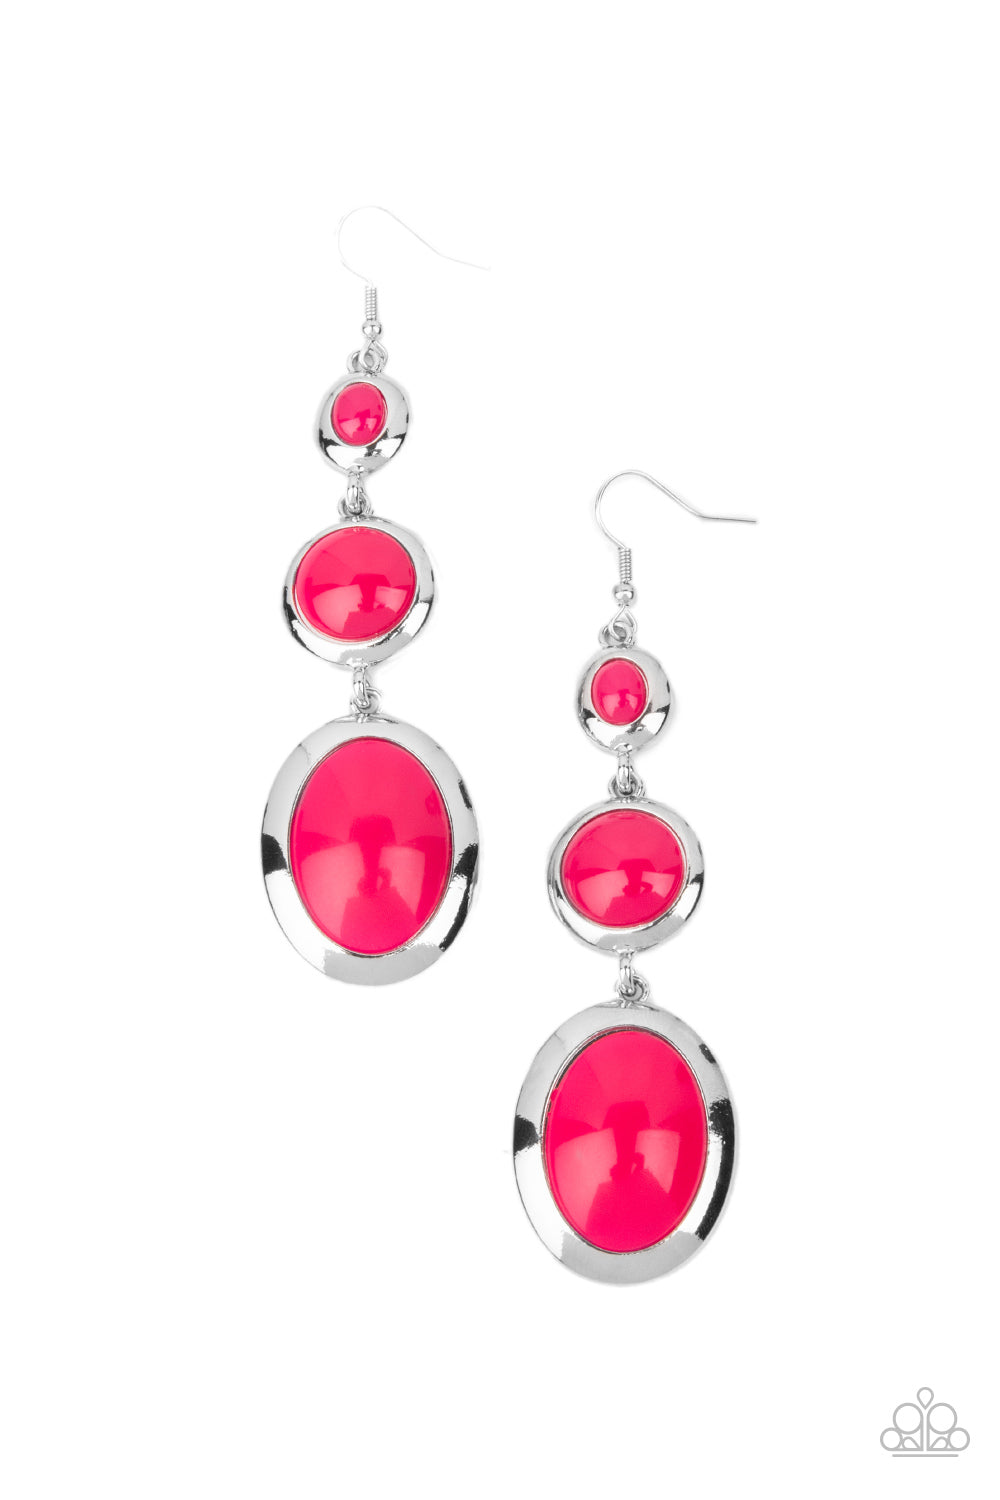 five-dollar-jewelry-retro-reality-pink-earrings-paparazzi-accessories